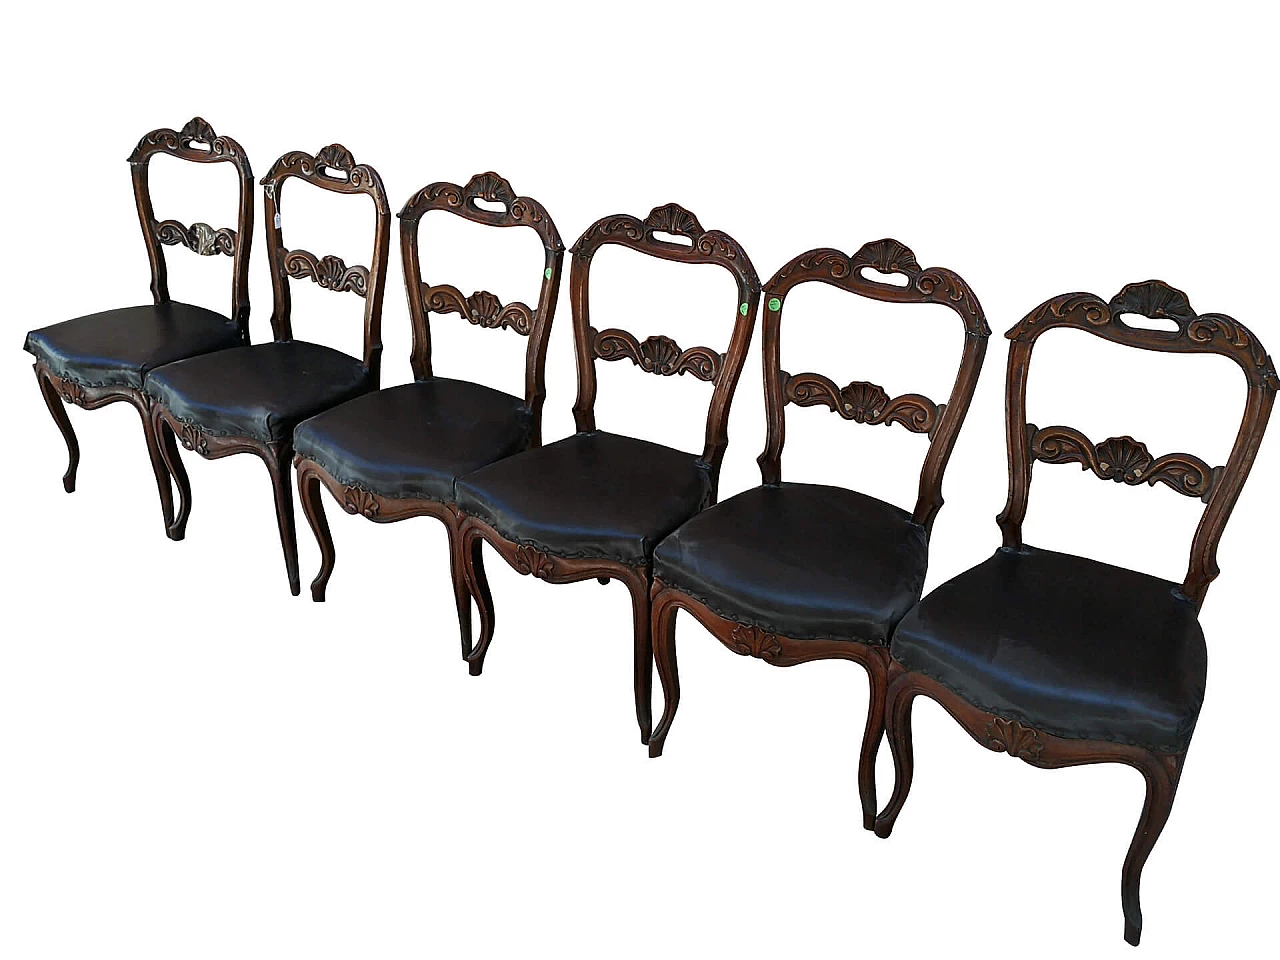 6 Louis XVI walnut chairs with leather covers, Veneto, late 18th century 1310640